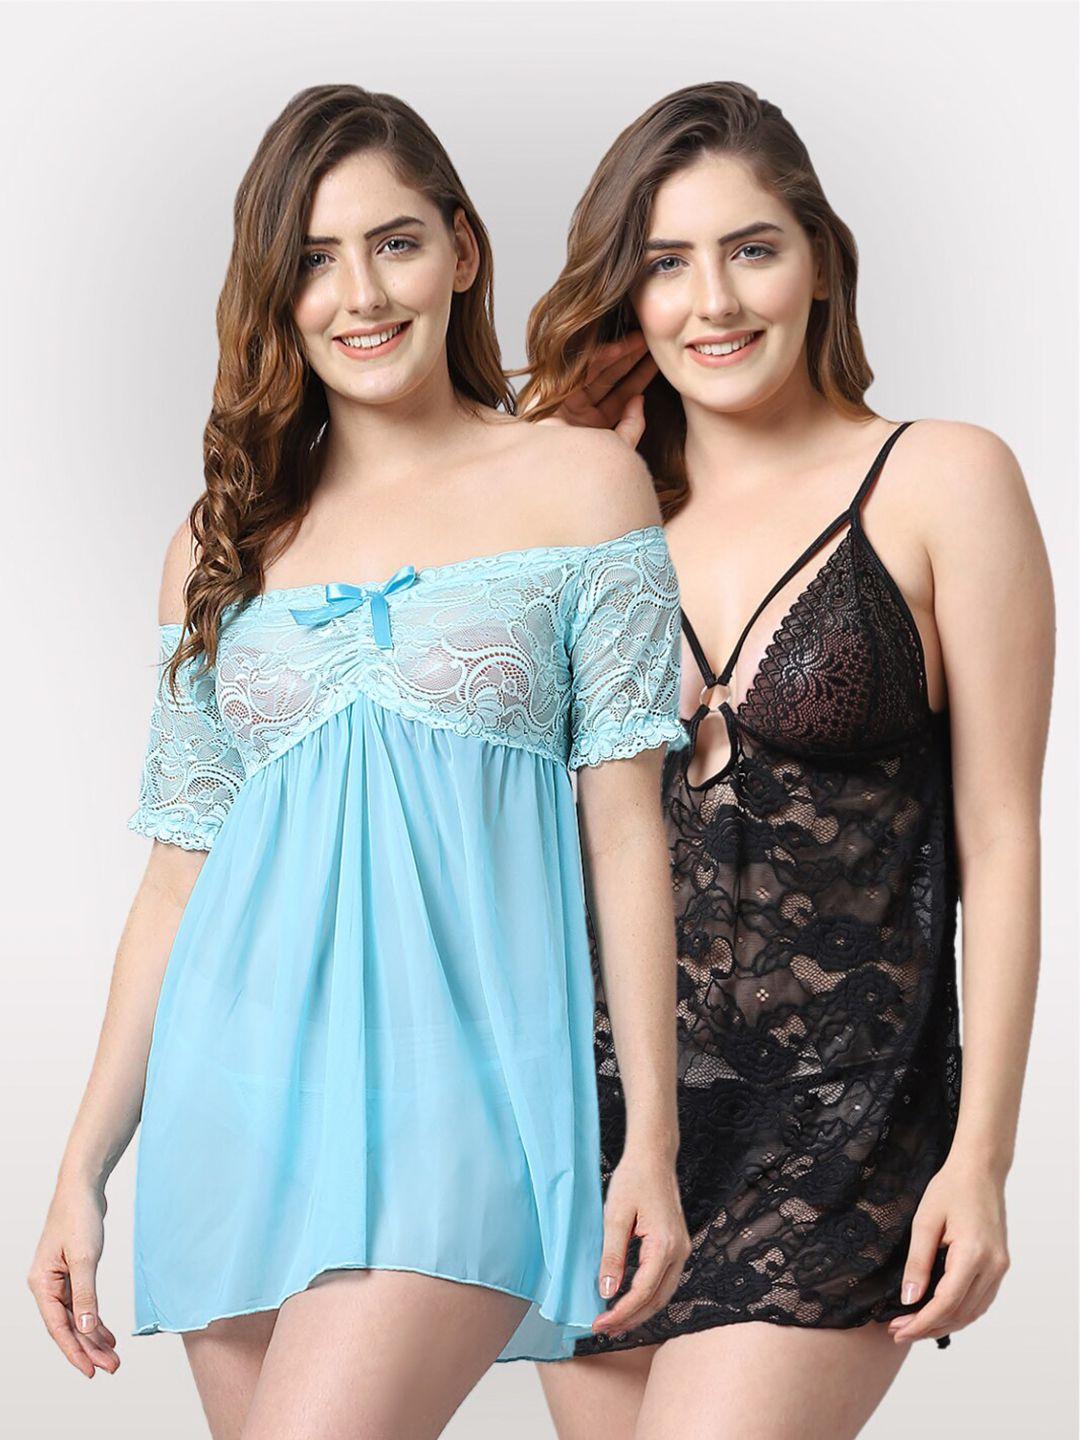 shararat pack of 2 blue & black lace baby doll